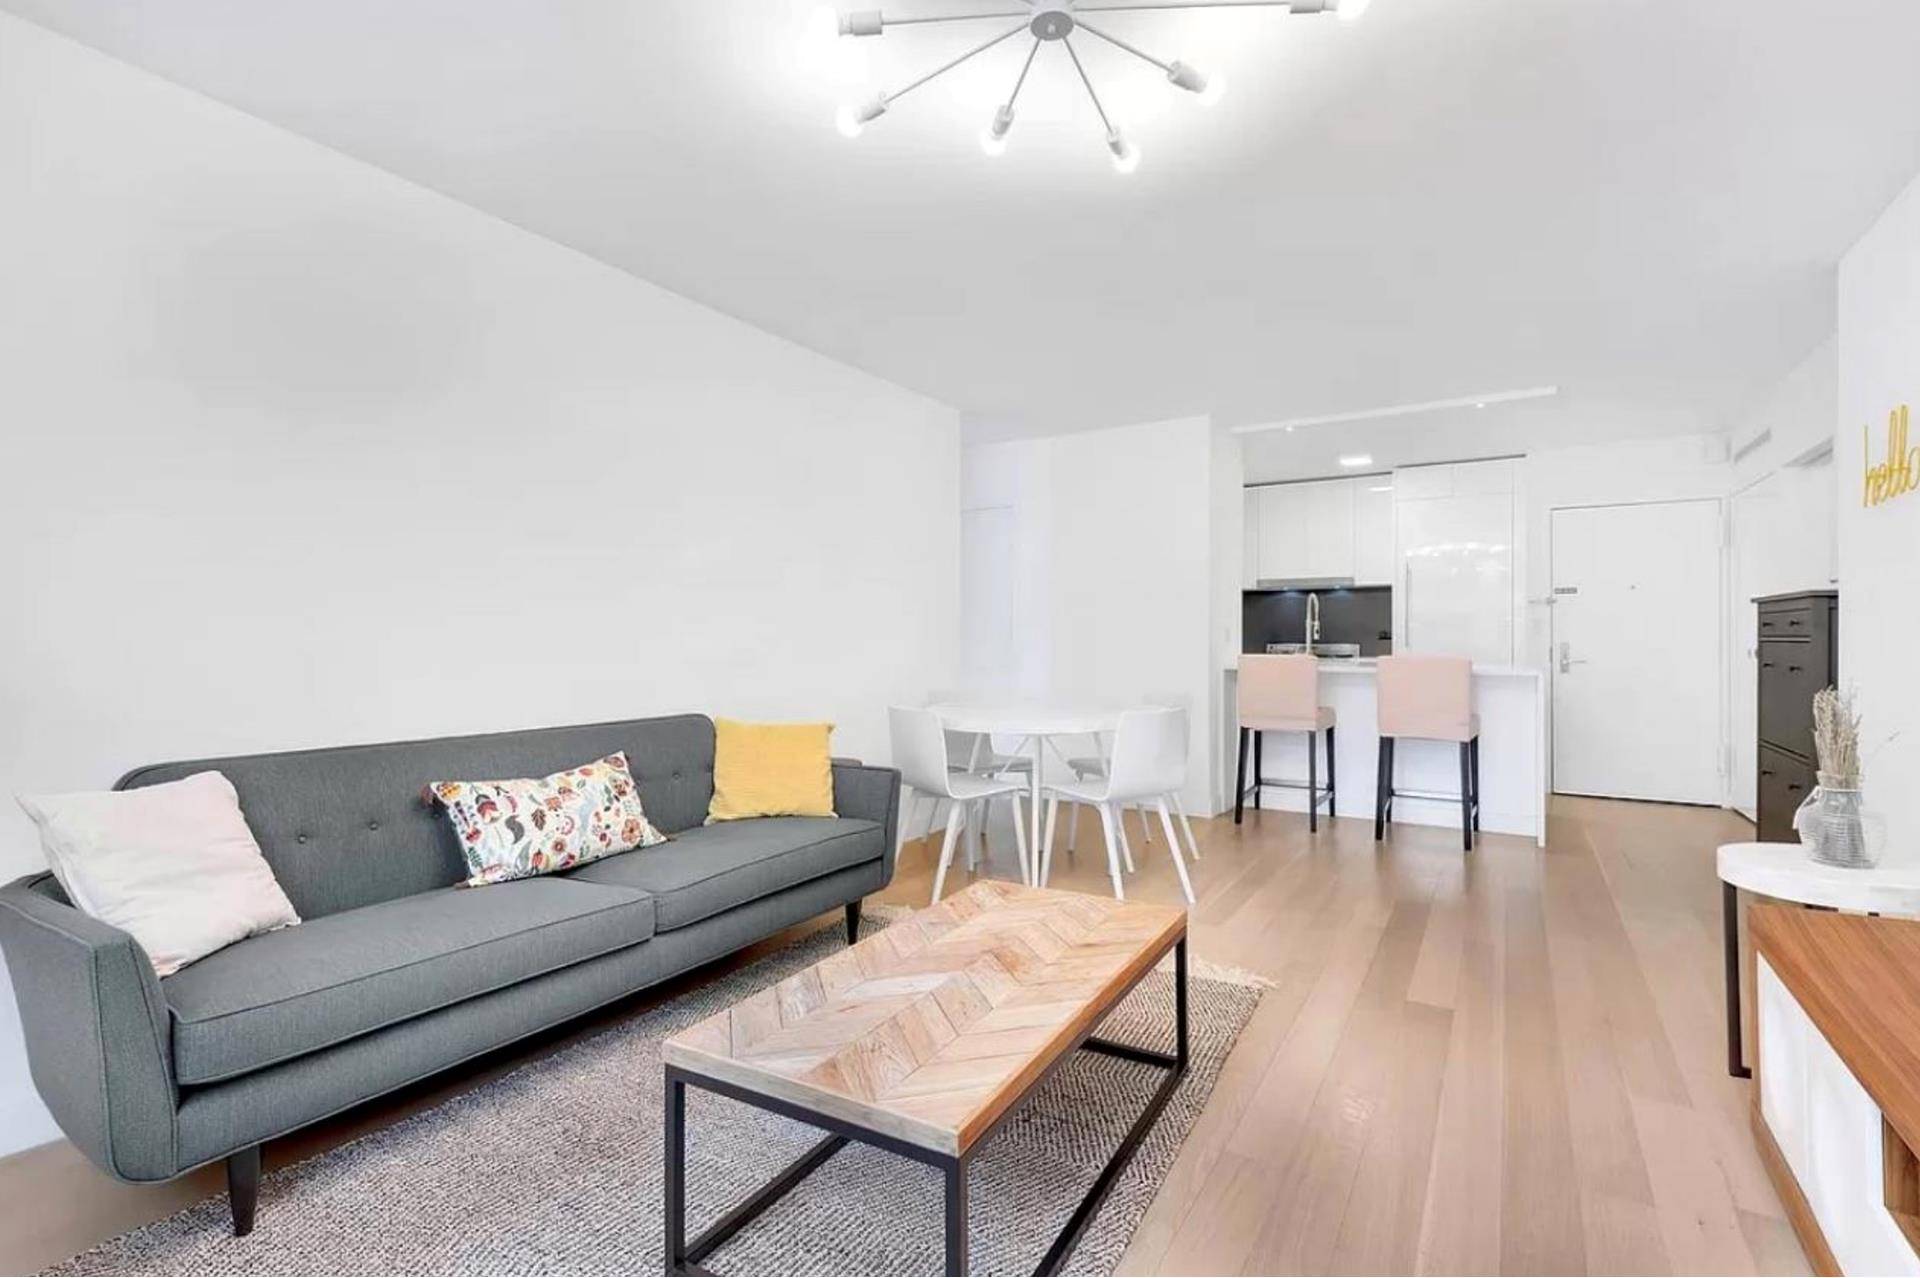 Great Opportunity in Amazing Location This beautiful 3 bedroom 2 bathroom FURNISHED home is located just a few blocks from Central Park, with great light through the day.